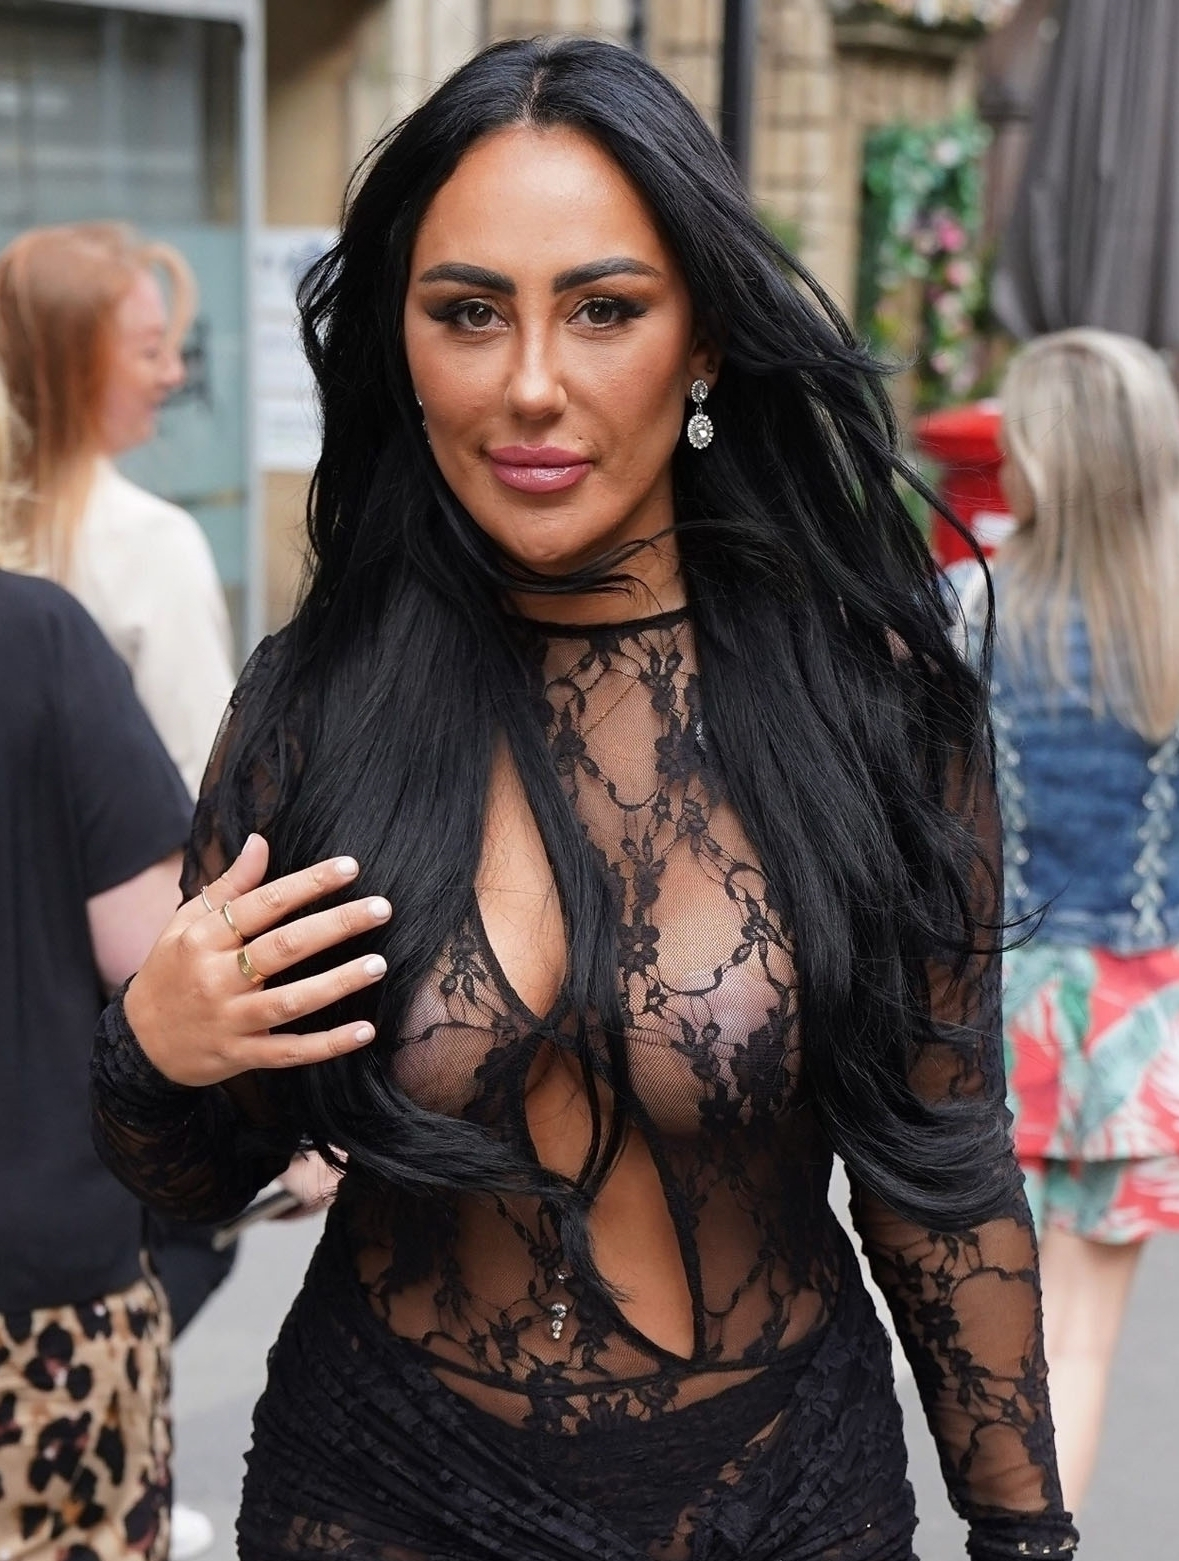 Sophie Kasaei’s See-Through Dress Moment: A Fashion Highlight of Her Greece Vacation